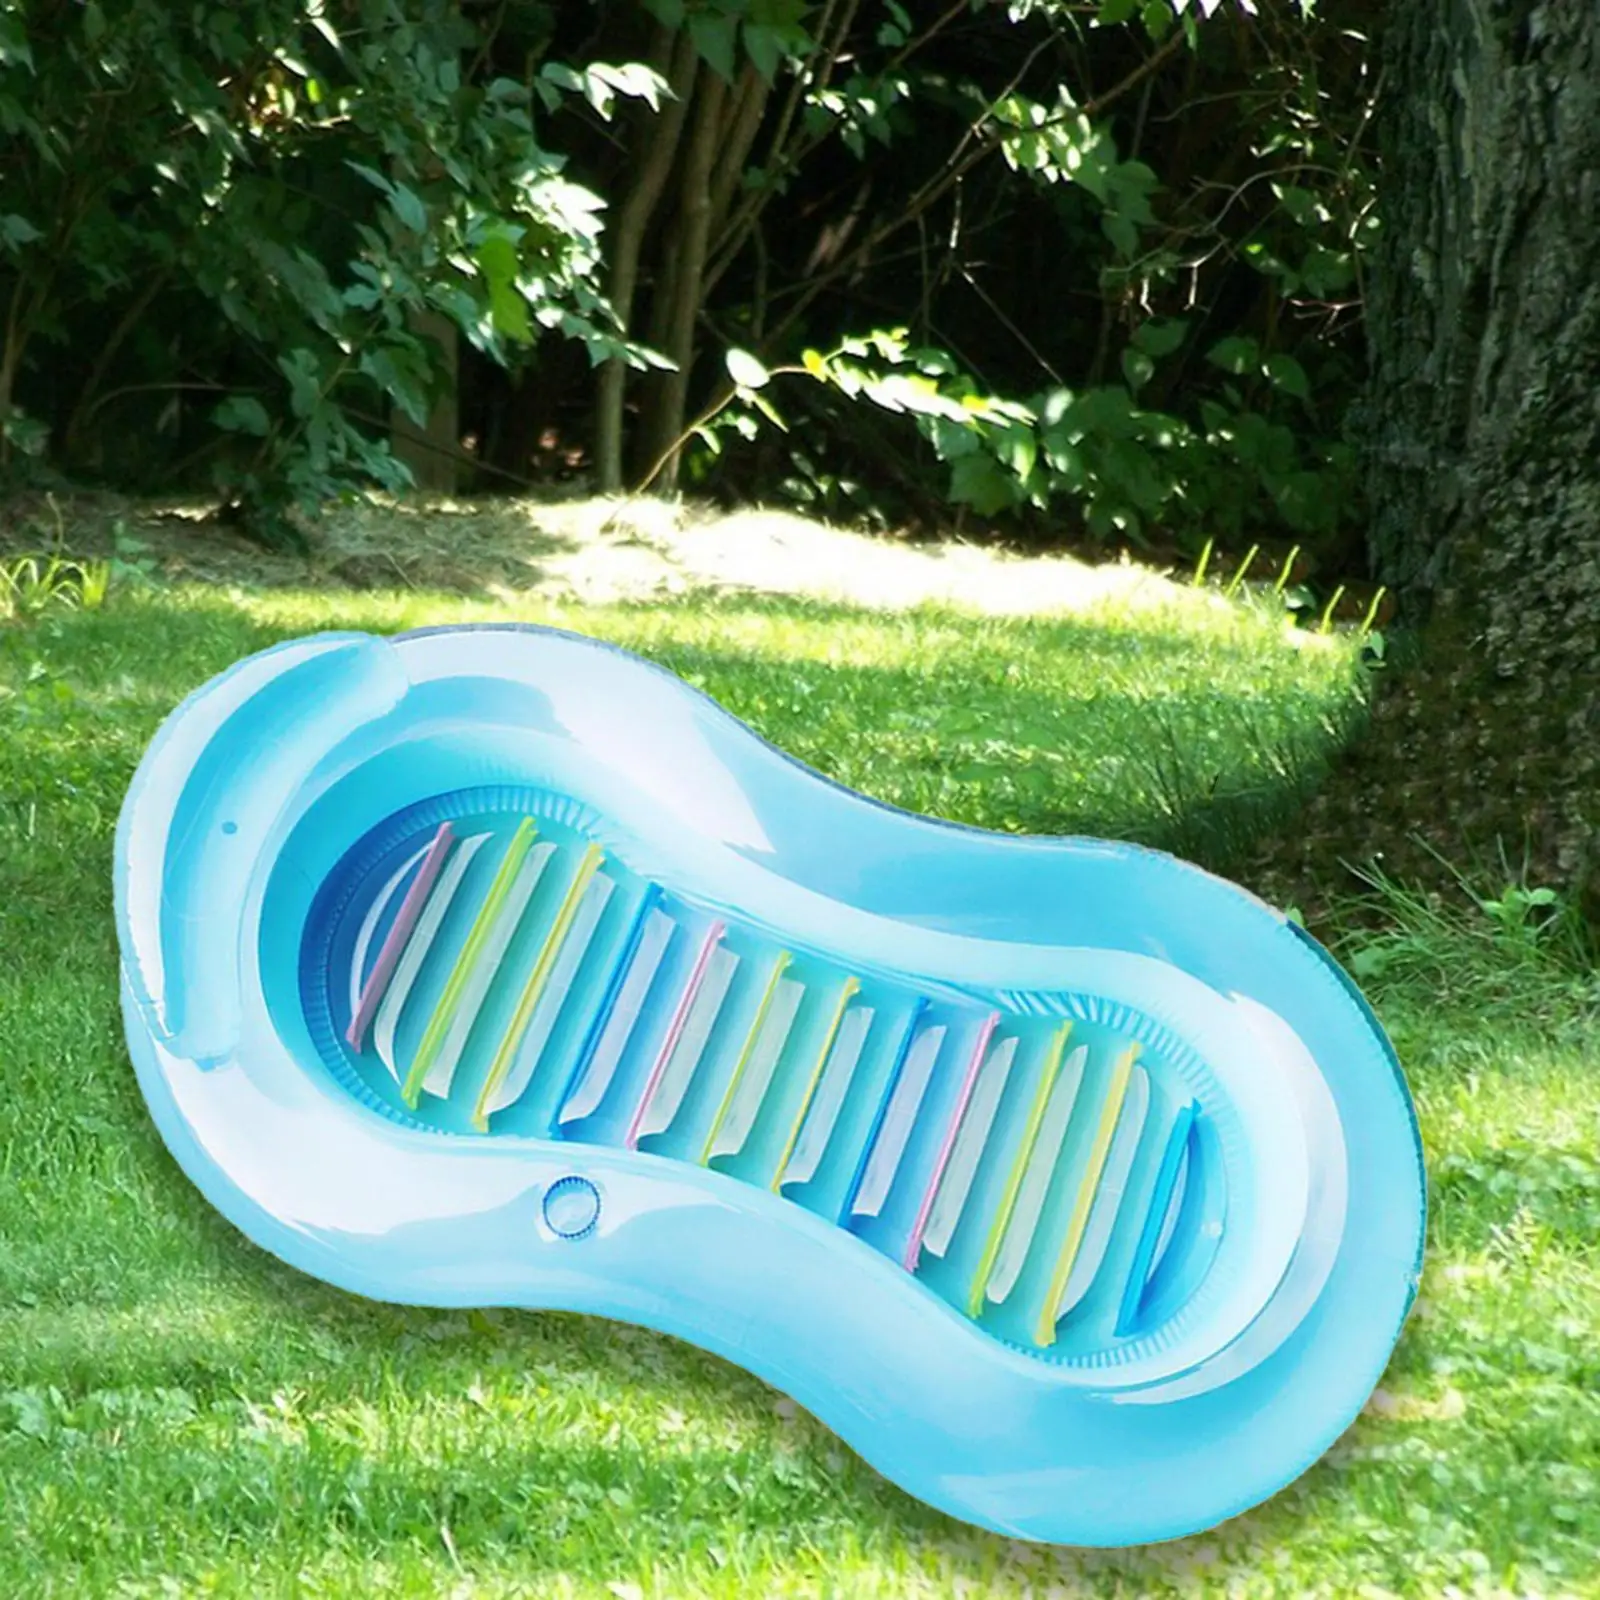 

PVC Pool Floats Inflatable Lounge Chair Water Mattress Mat Floating Rafts Pool Floats Hammock for Pool